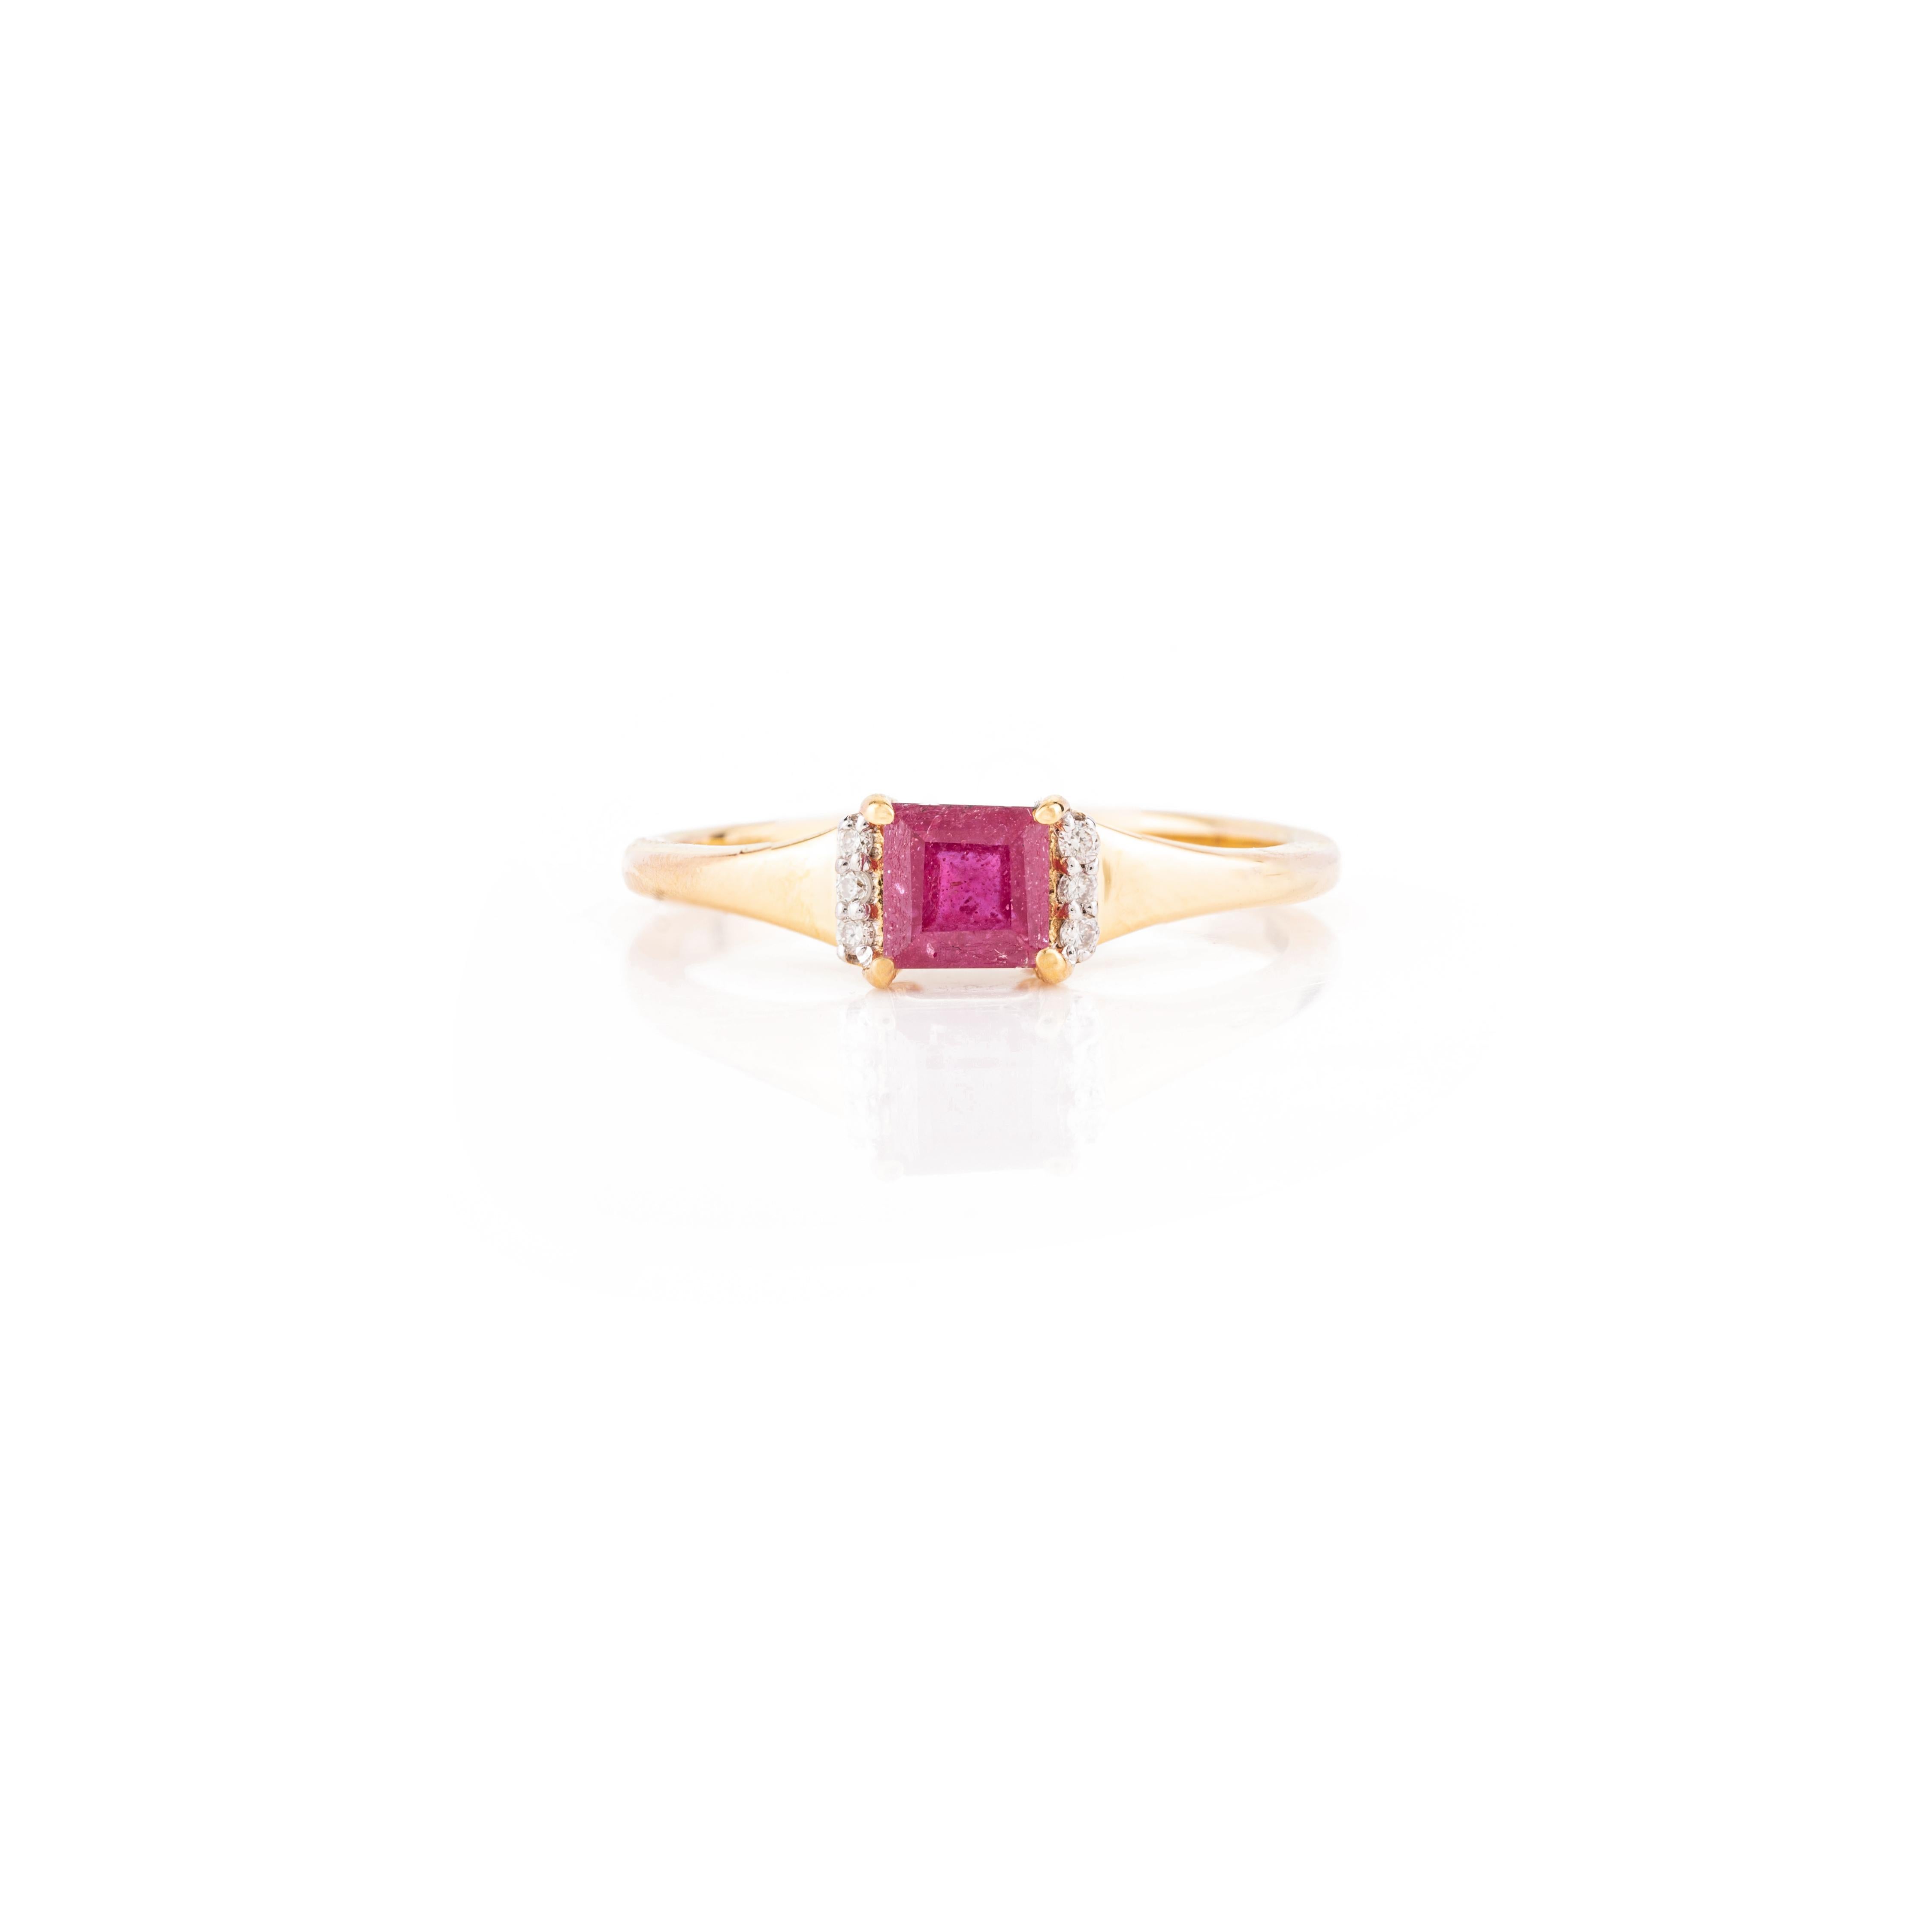 For Sale:  18k Yellow Gold Genuine Ruby Diamond Engagement Ring for Her 3